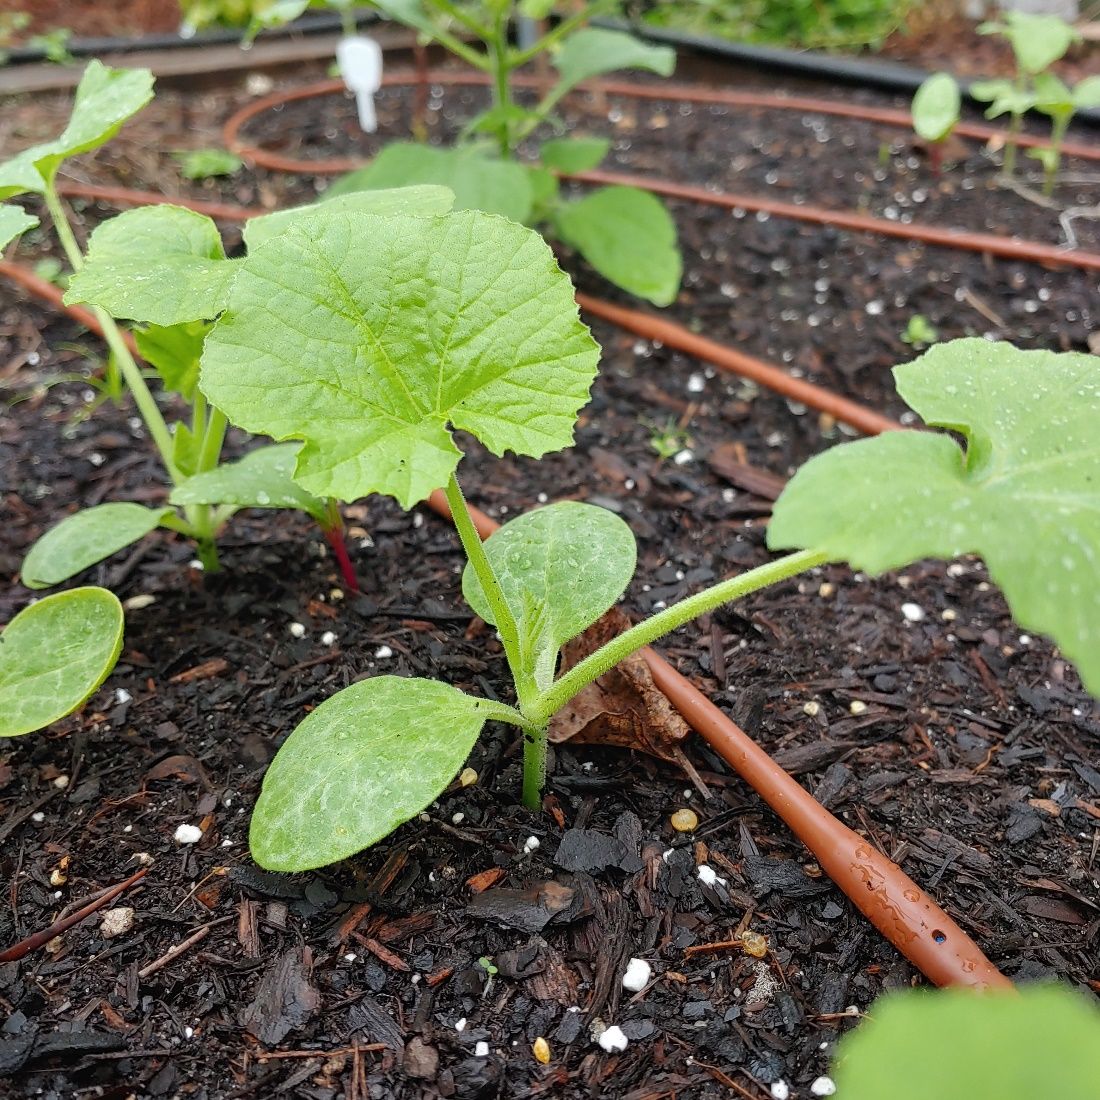 This dripline directly waters the soil and is ideal for squash, which are prone to fungal issues when leaves remain wet. 